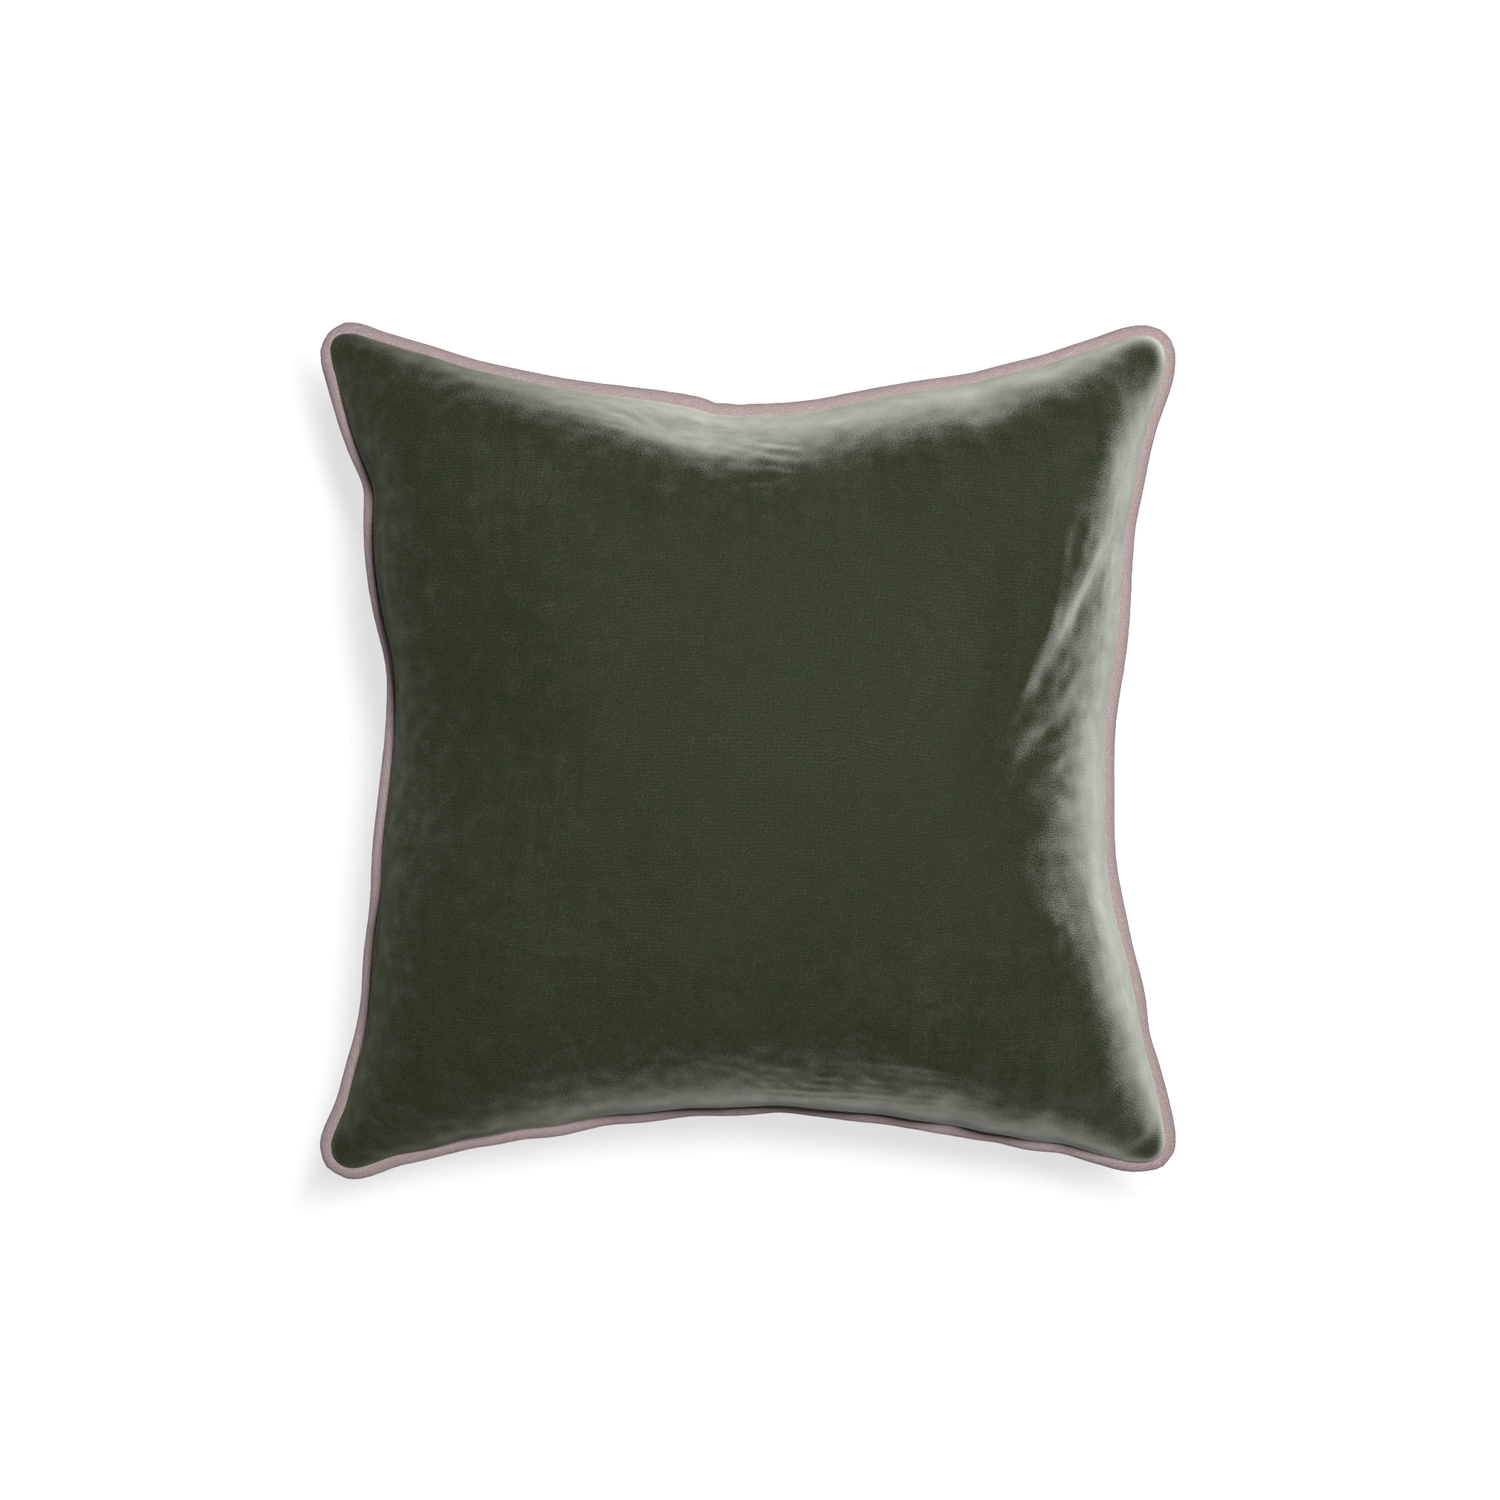 18-square fern velvet custom fern greenpillow with orchid piping on white background